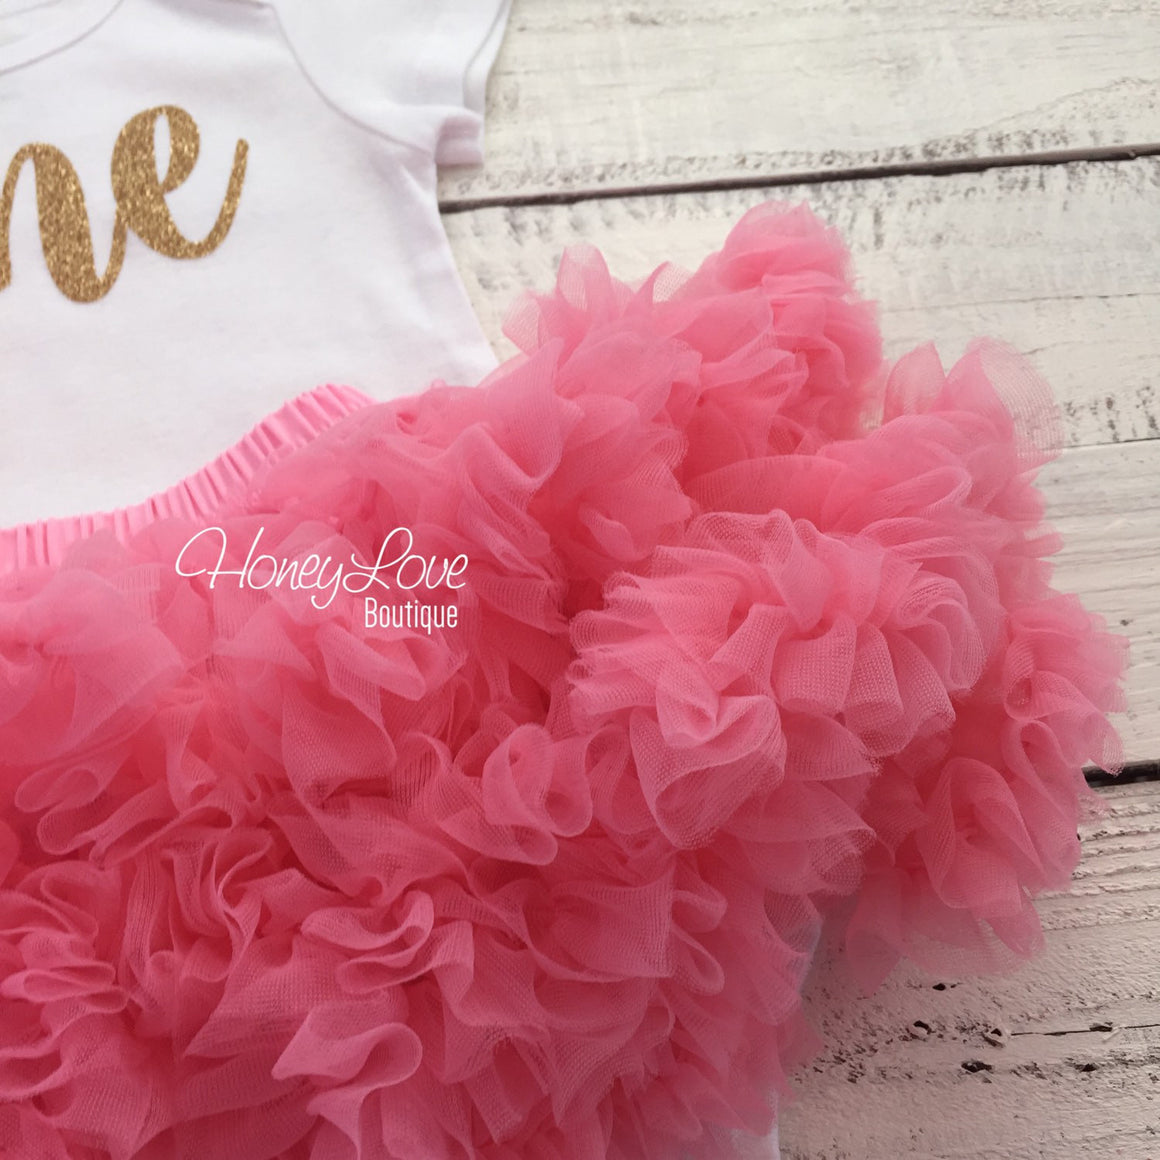 One - Birthday Outfit - Gold Glitter and Coral Pink - HoneyLoveBoutique